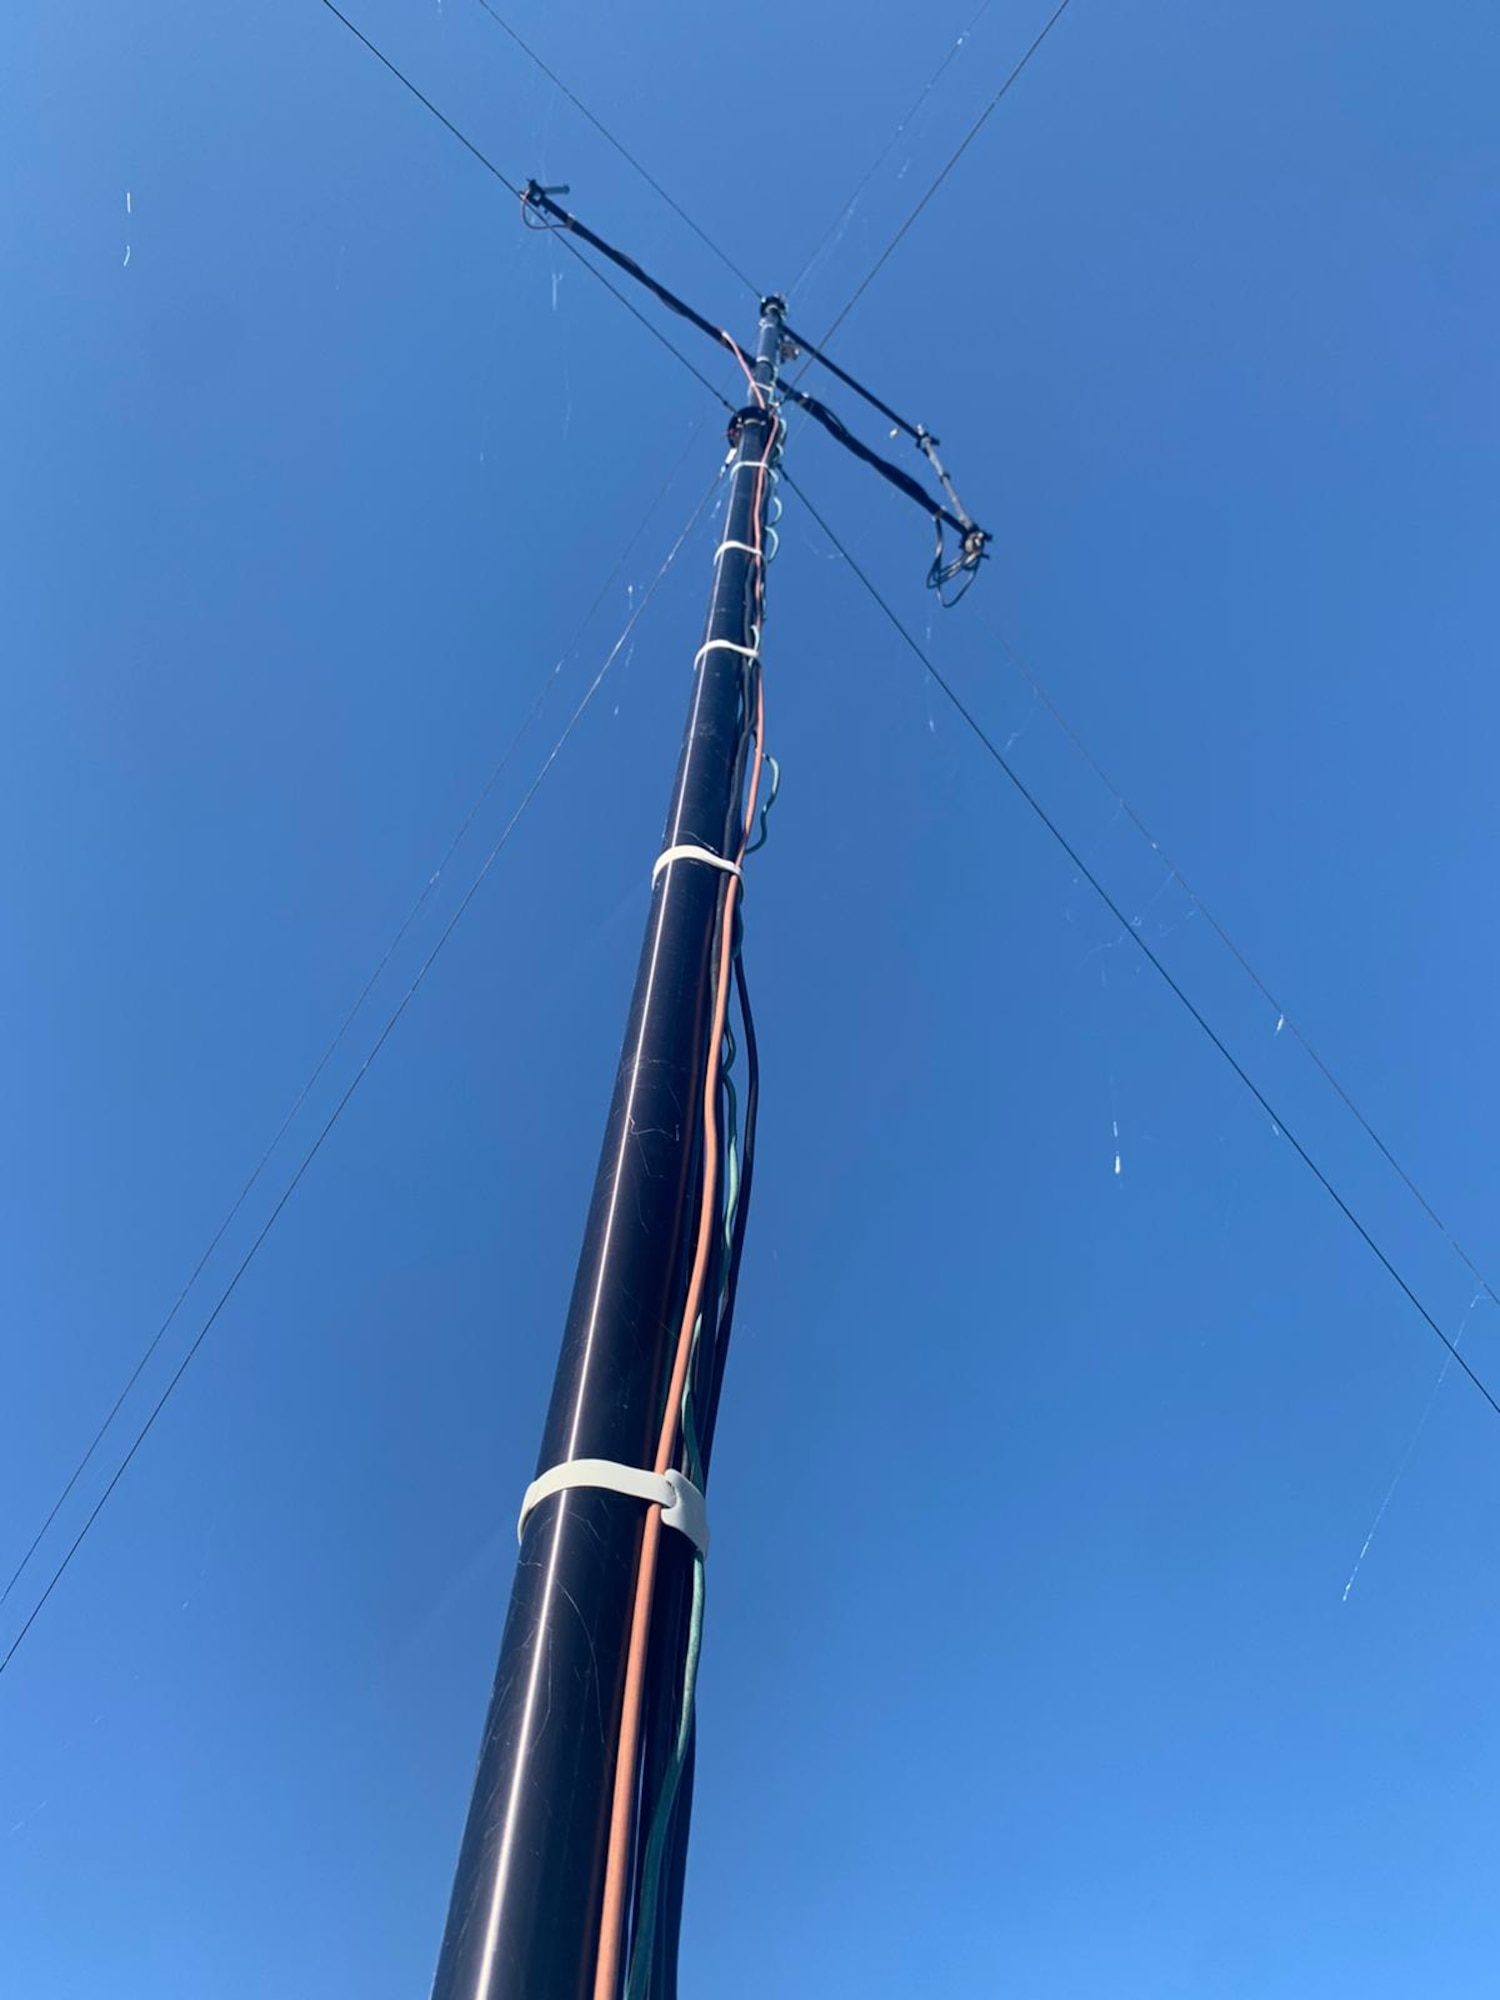 A BlueSky Mast antenna is shown during Castle Forge in Romania, Oct. 27, 2021. The BlueSky Mast is part of the Scalable Control and Reporting Agile Mission Kit (SCRAM-K) and was used to communicate with aircraft that participated in the exercise. (Courtesy Photo)